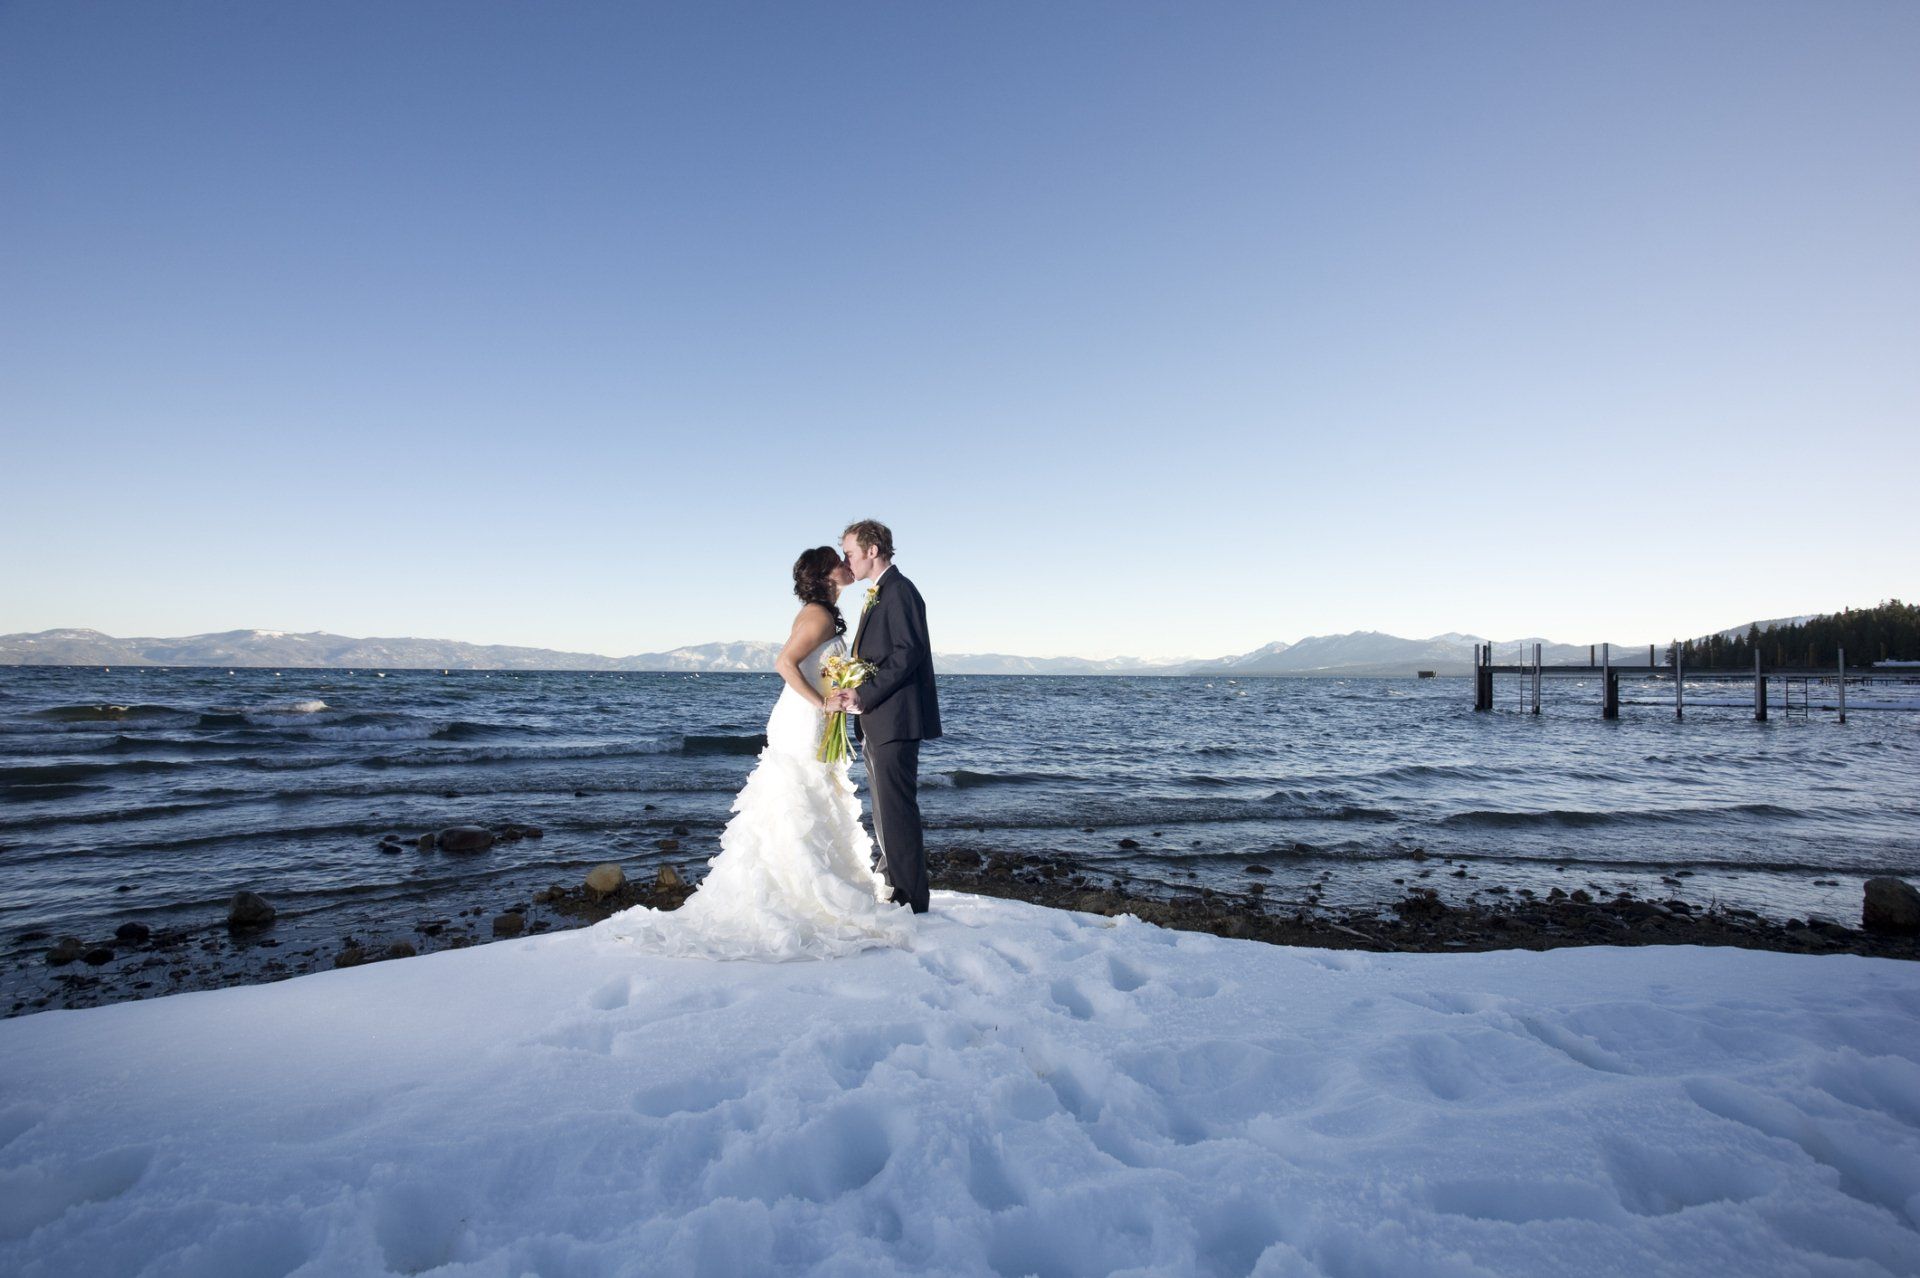 Couple nuptial in a snow covered shoreline